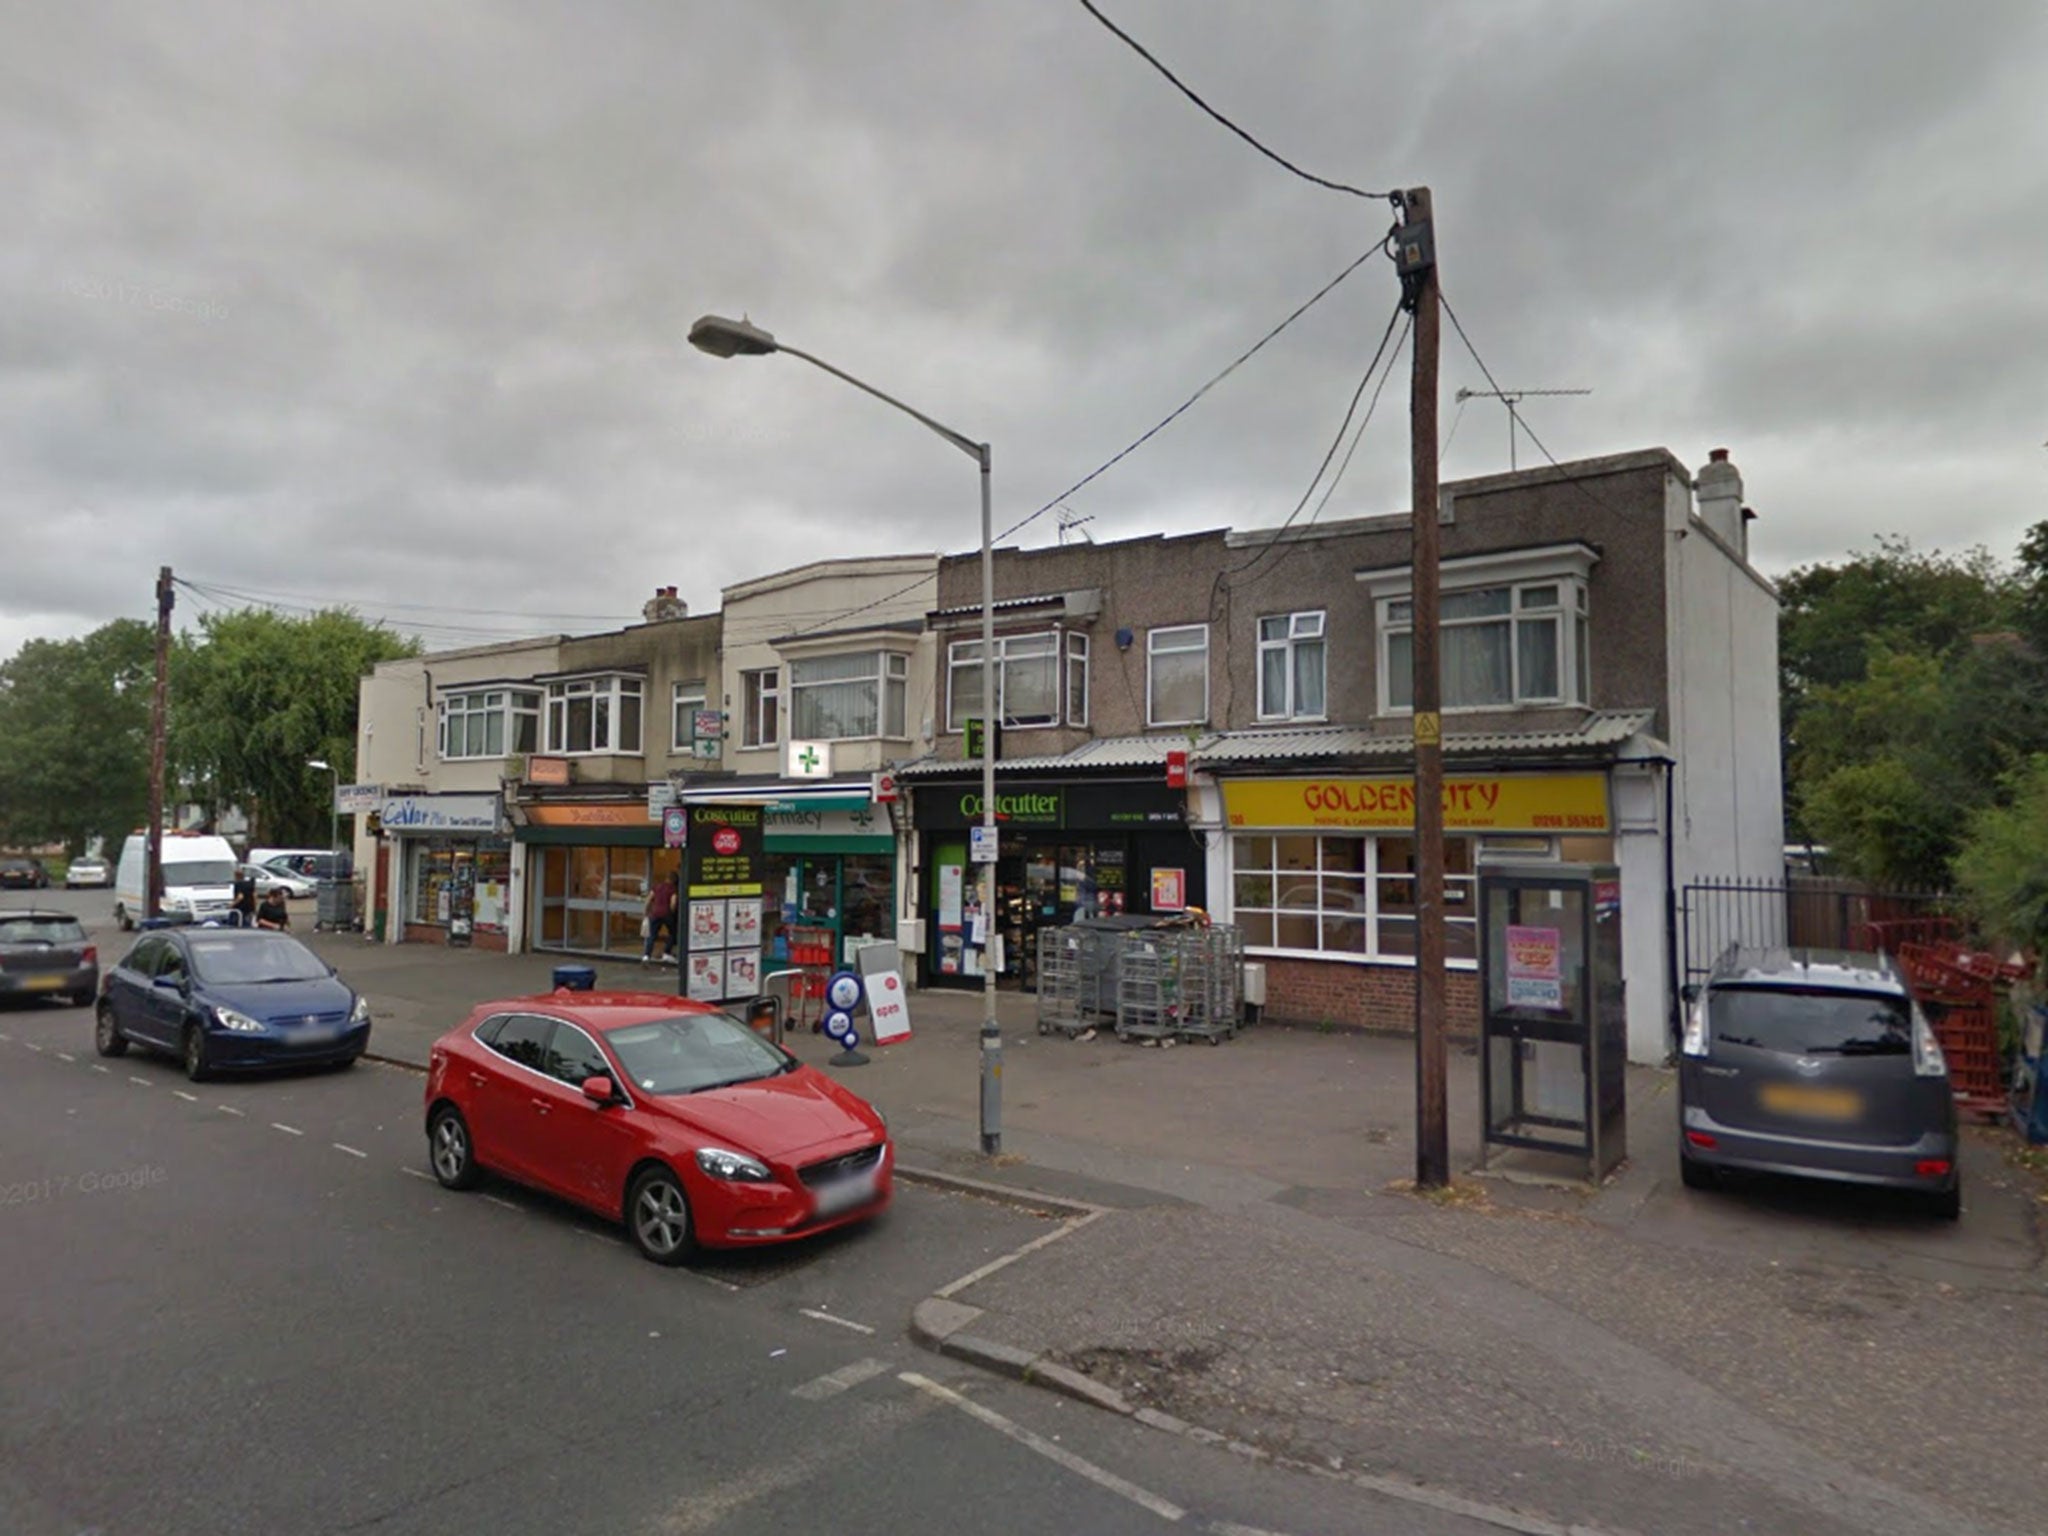 The incident unfolded outside a row of shops in Pitsea on Saturday